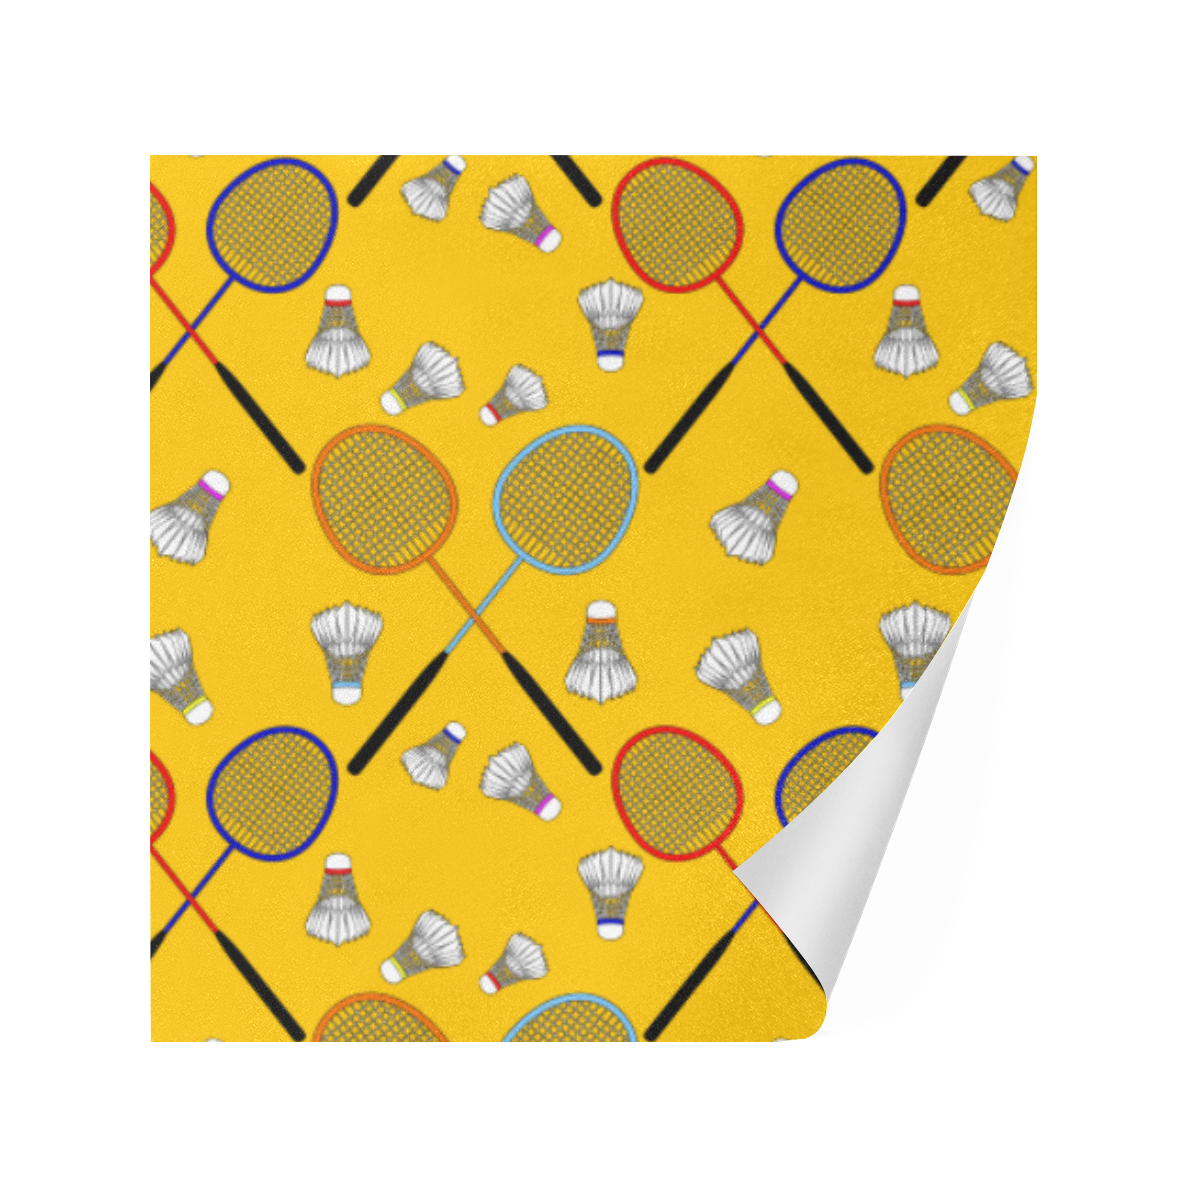 Badminton Rackets and Shuttlecocks Pattern Sports Yellow Gift Wrapping Paper 58"x 23" (5 Rolls)